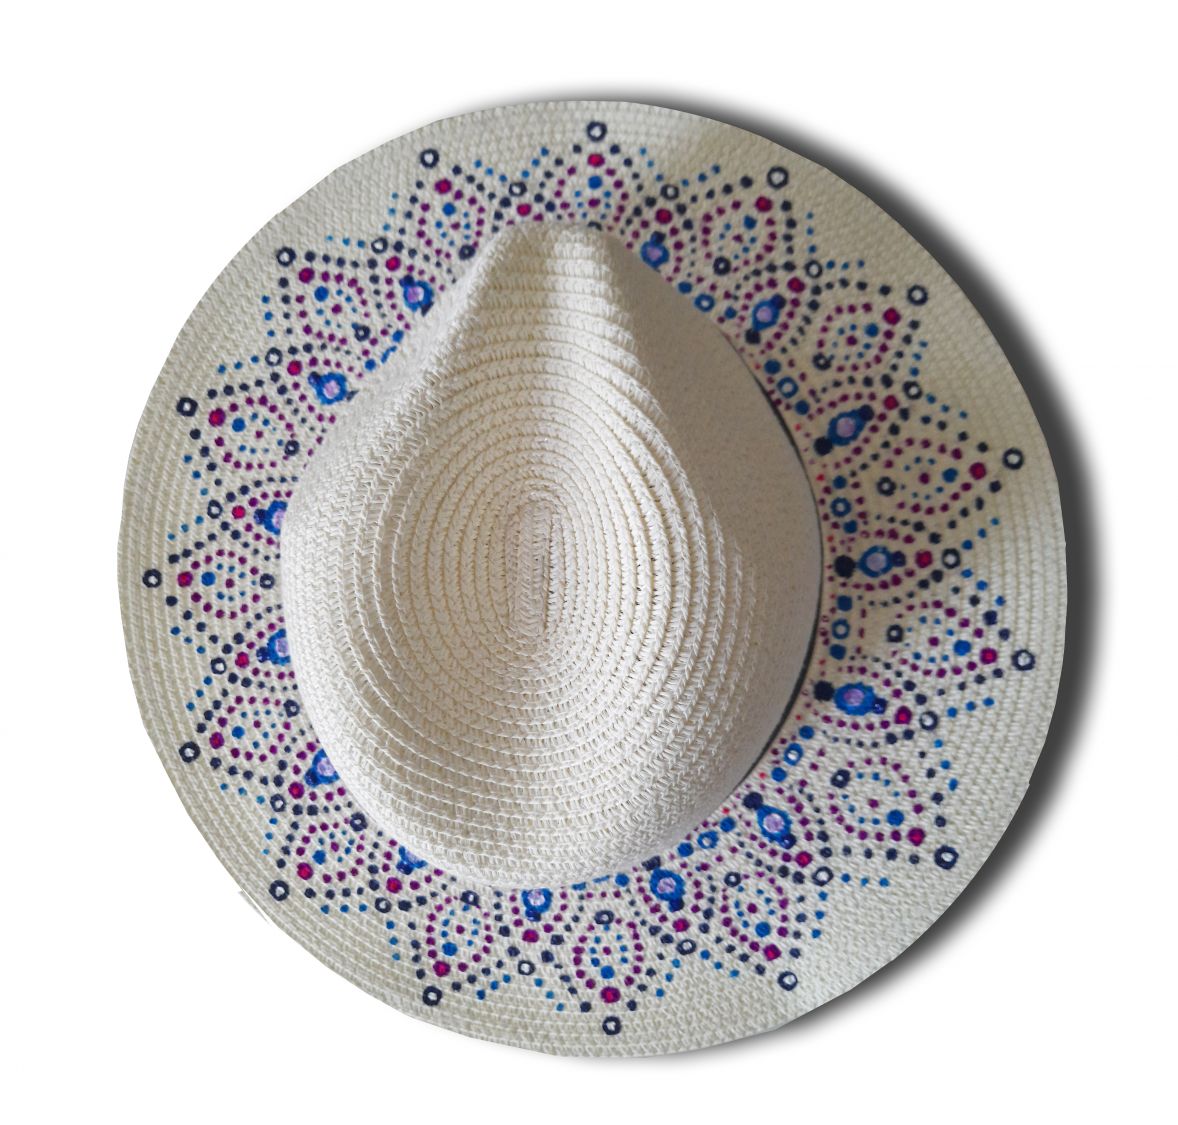 A nice Panama style hat made of coated straw for better protection